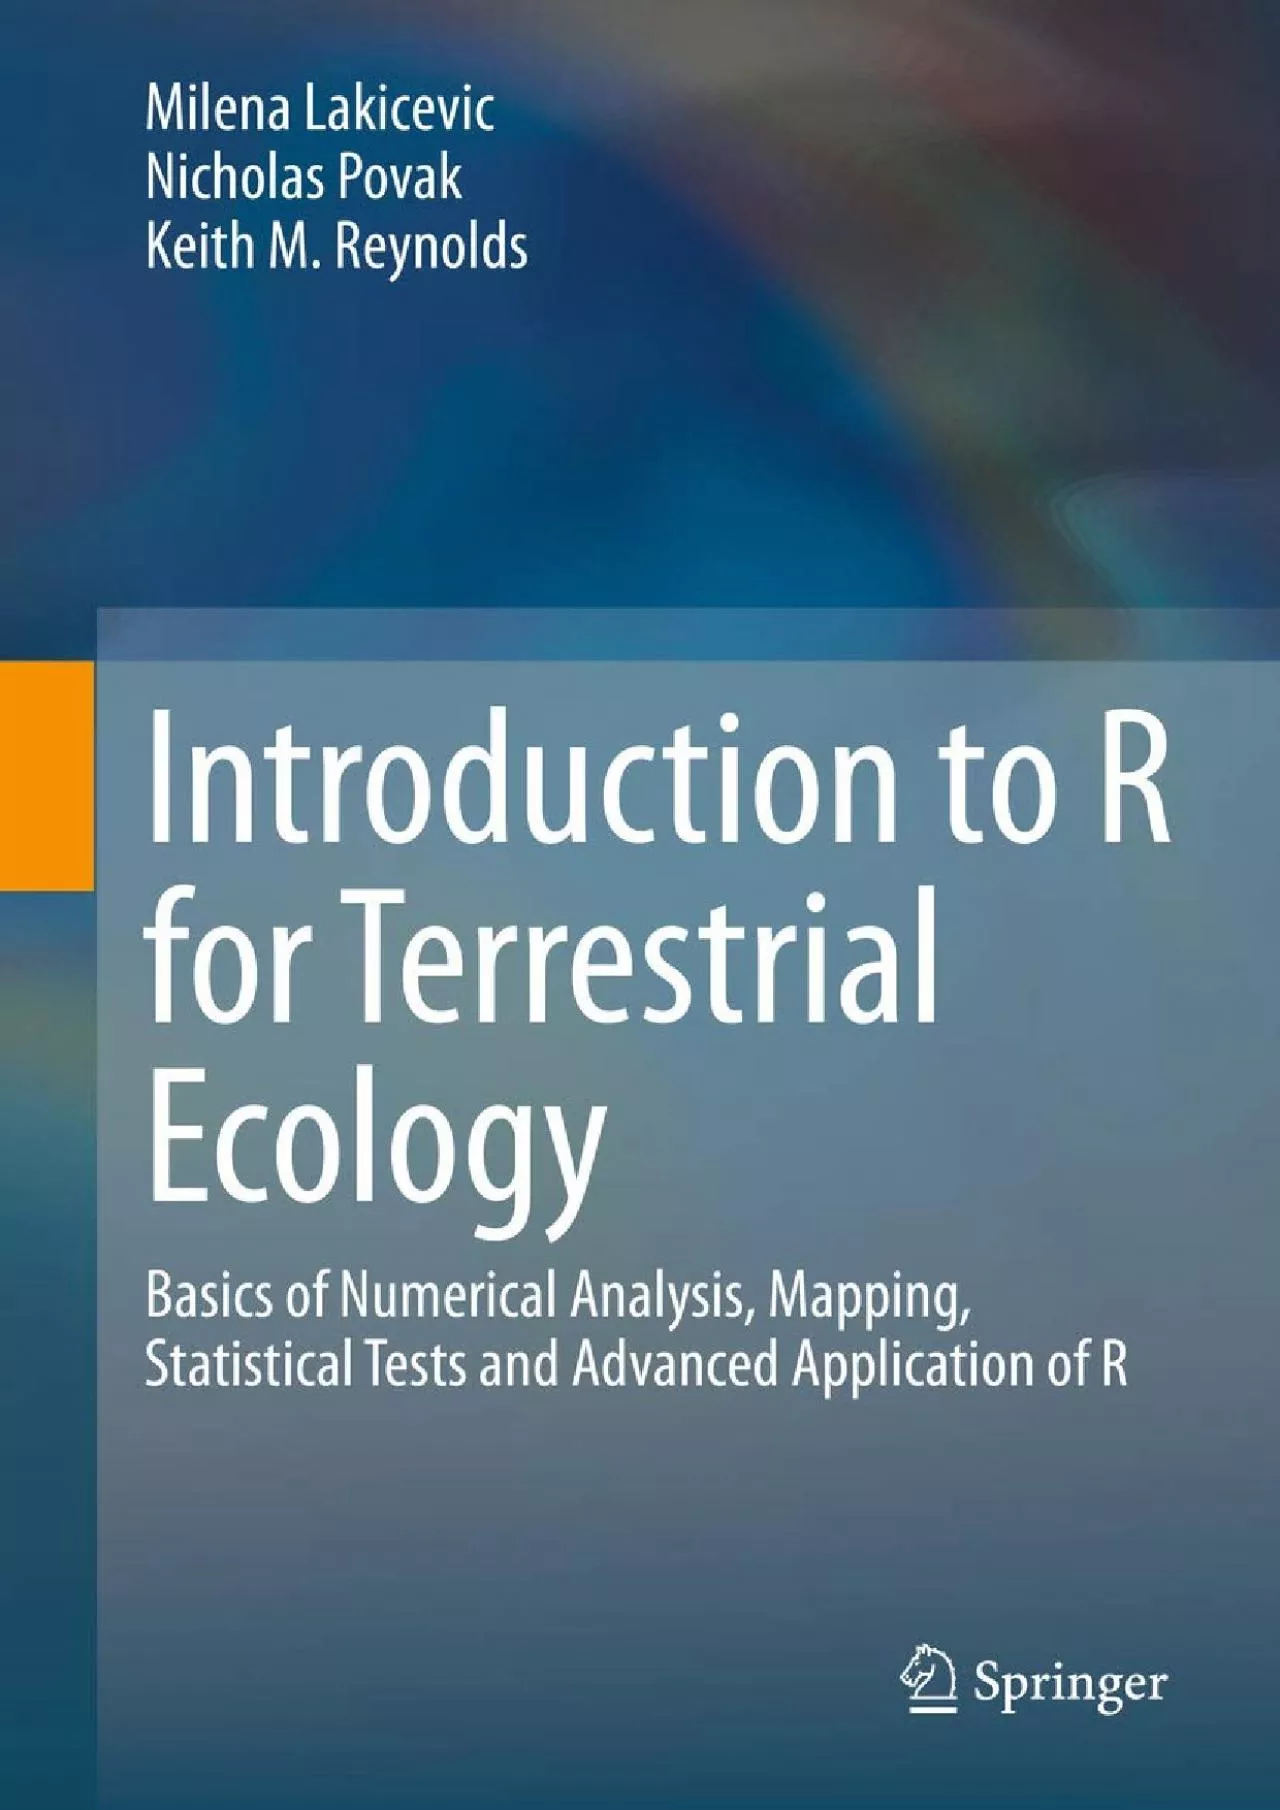 [READING BOOK]-Introduction to R for Terrestrial Ecology: Basics of Numerical Analysis,